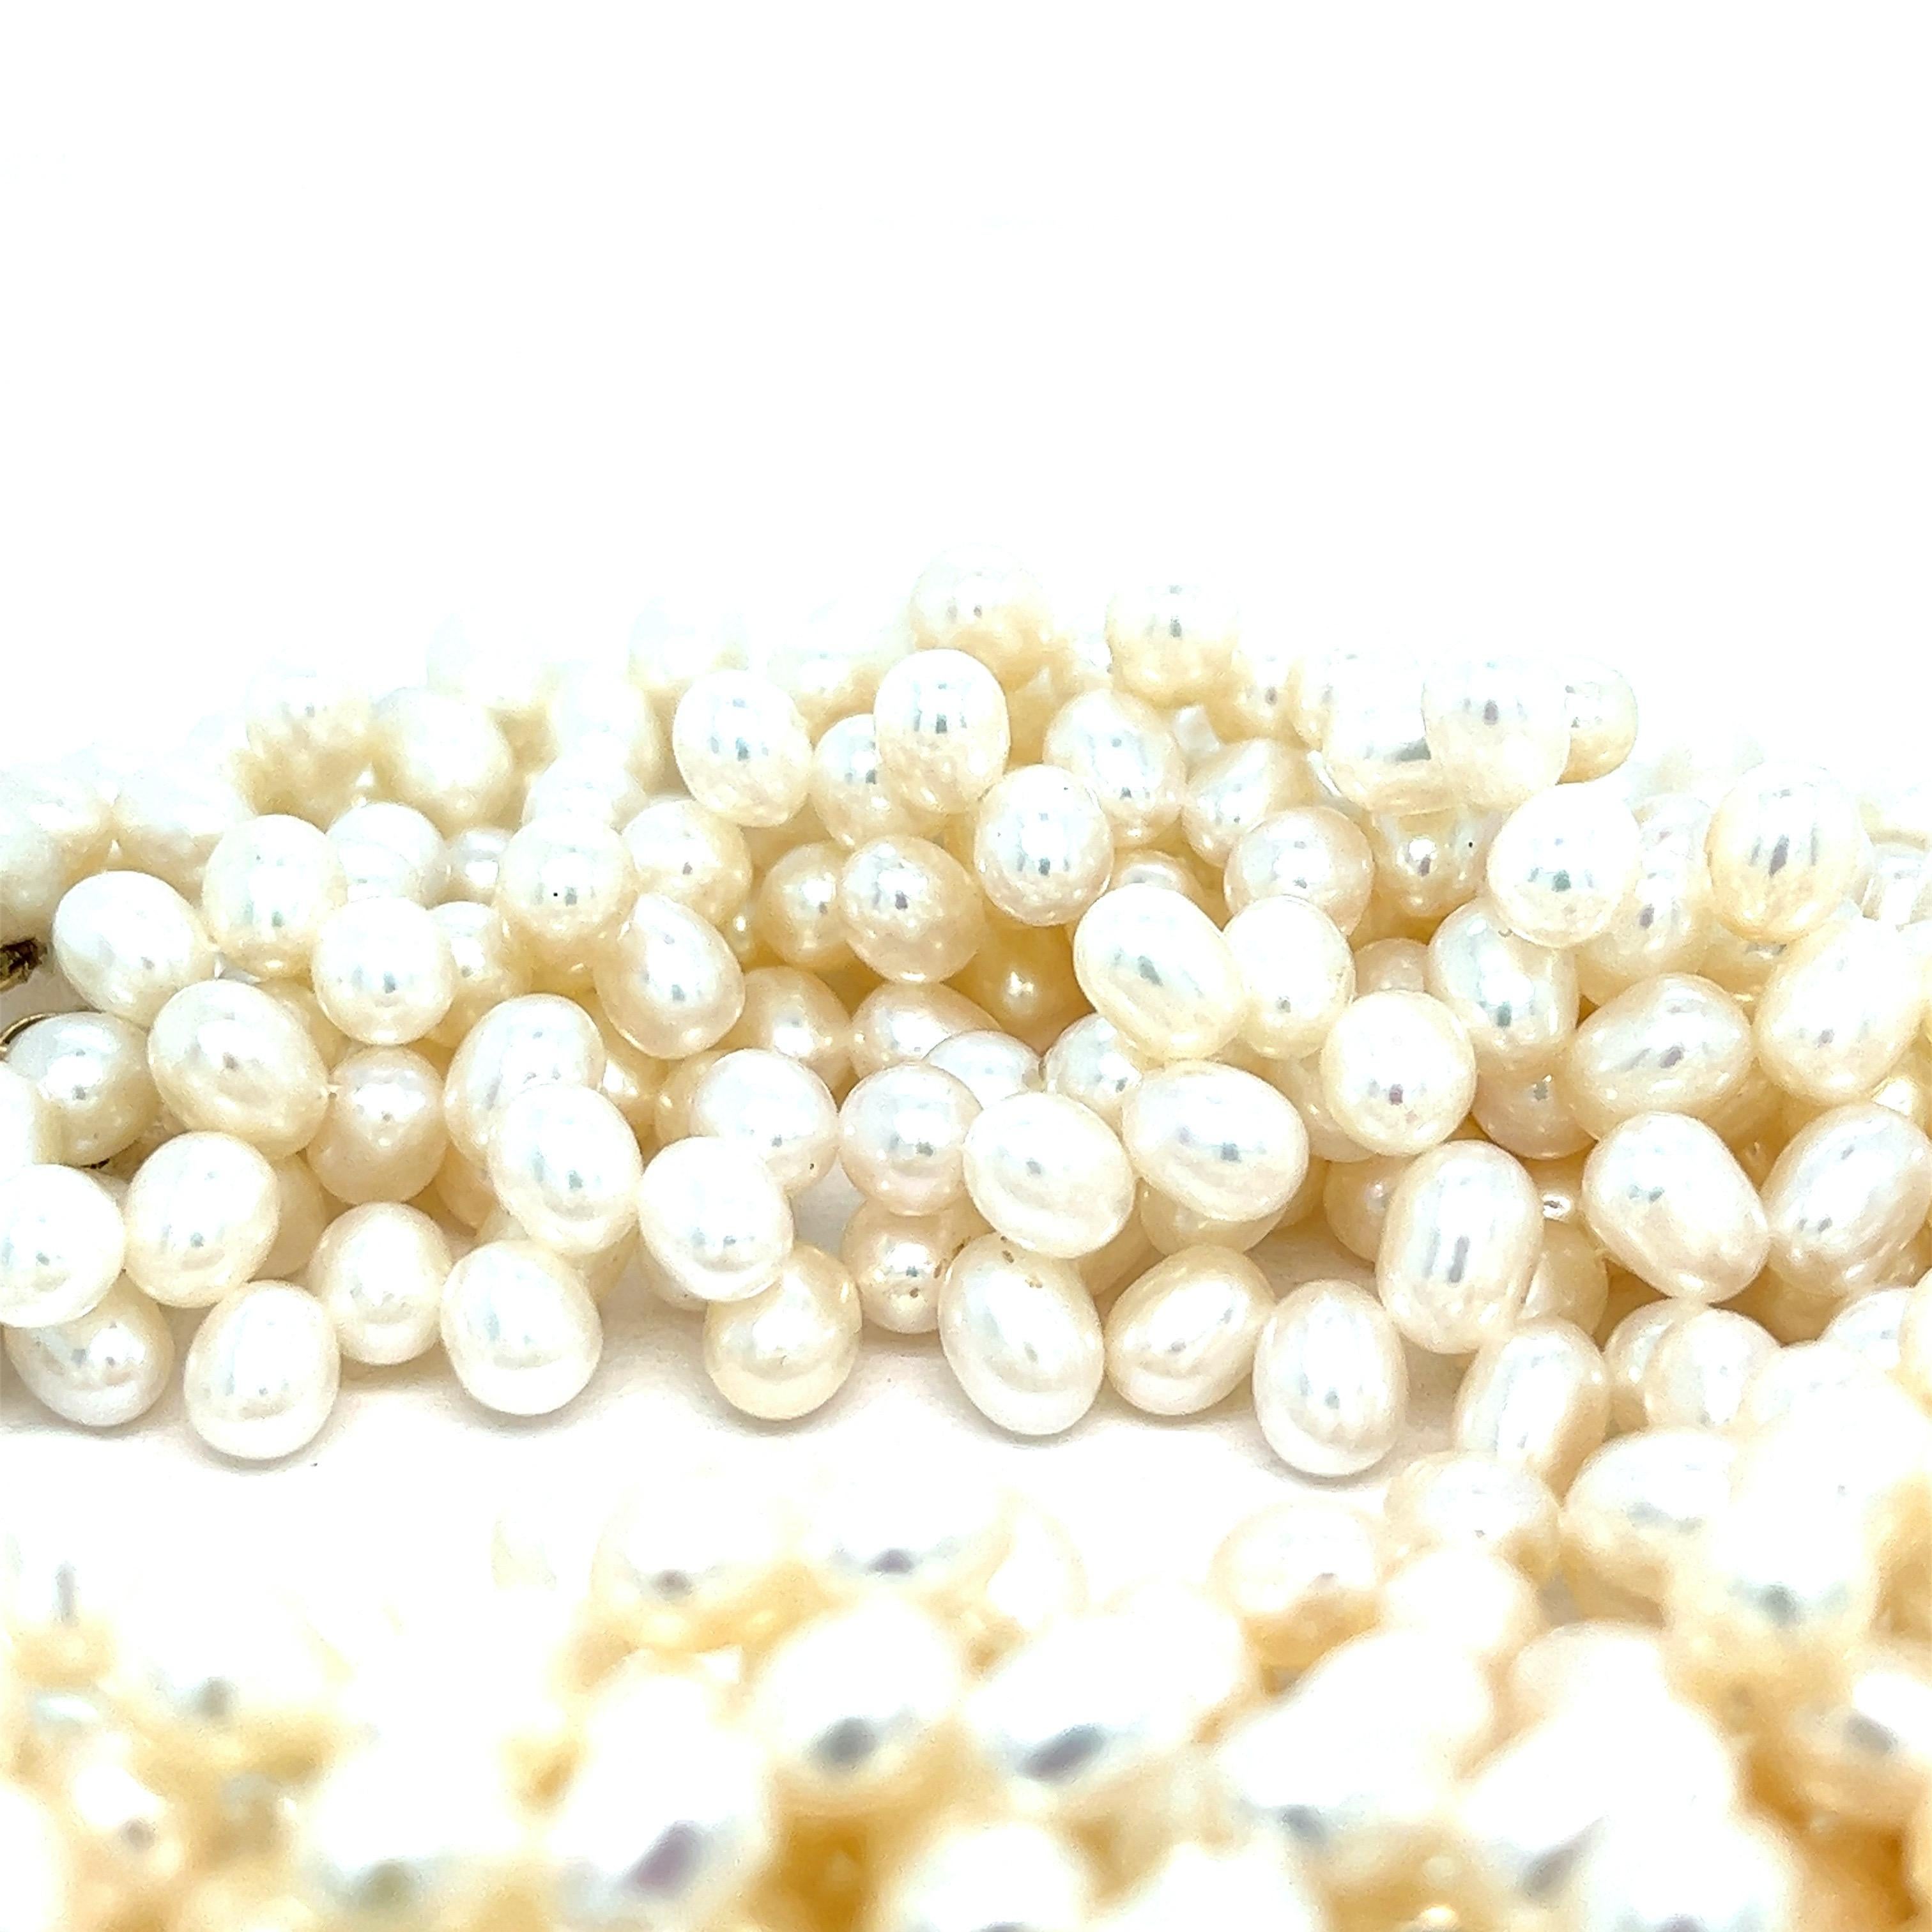 Paloma Picasso for Tiffany & Co. freshwater pearl necklace, circa 1980s

Multiple strands of freshwater pearls with 18 karat yellow gold clasp; marked Tiffany & Co., Paloma Picasso, 750

Size: length 17 inches
Total weight: 238.7 grams